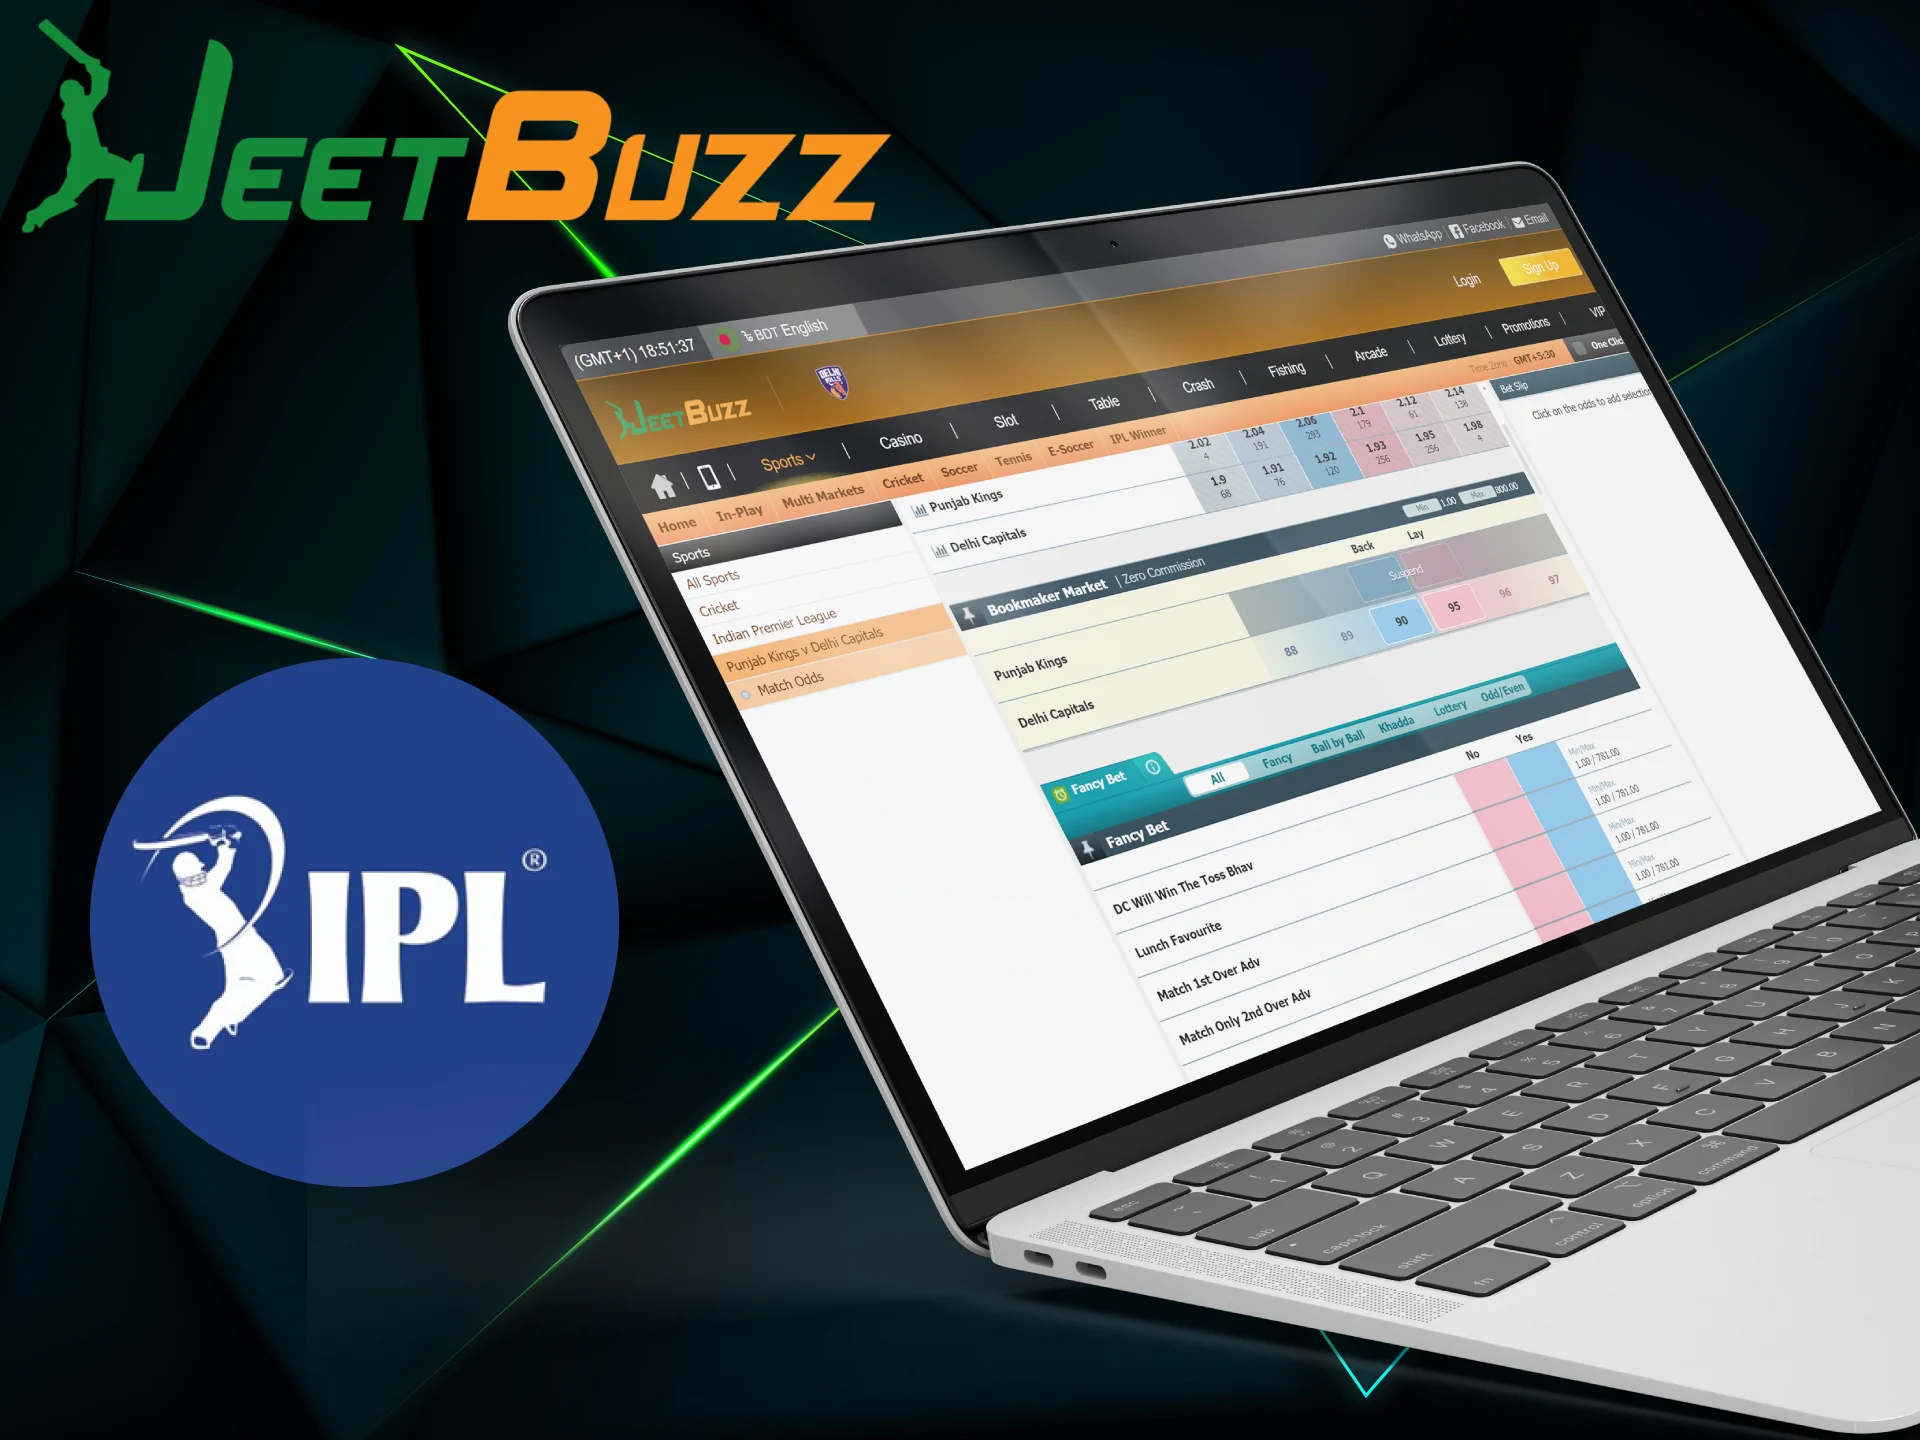 JeetBuzz accepts pre-match bets just before the start of a sporting event.